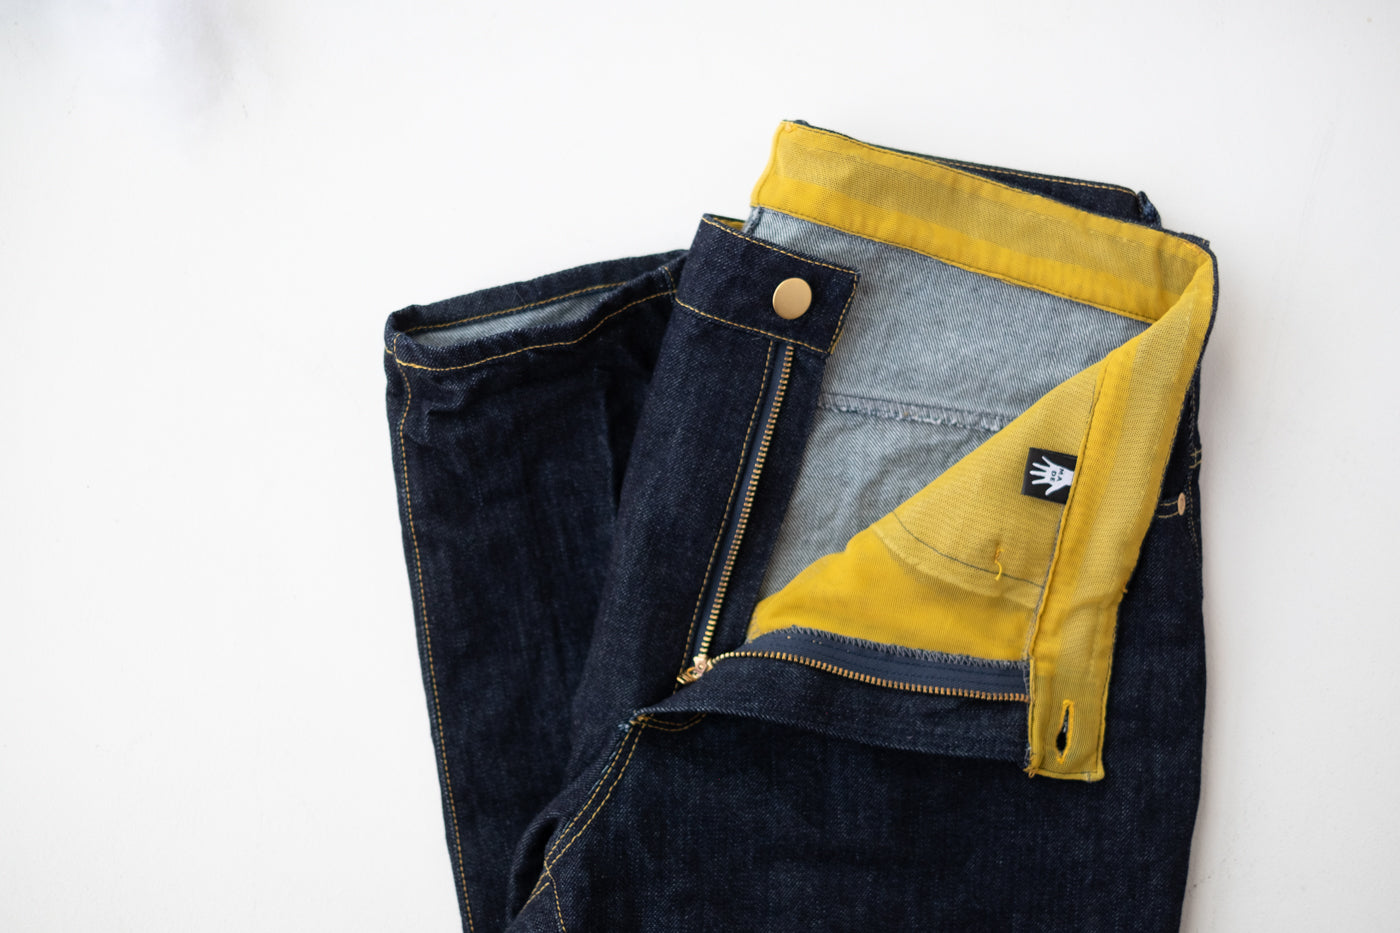 Demin jeans laying flat, folded on a white background.  The zipper is unzipped, folded back to show the yellow mesh lining with a custom label.